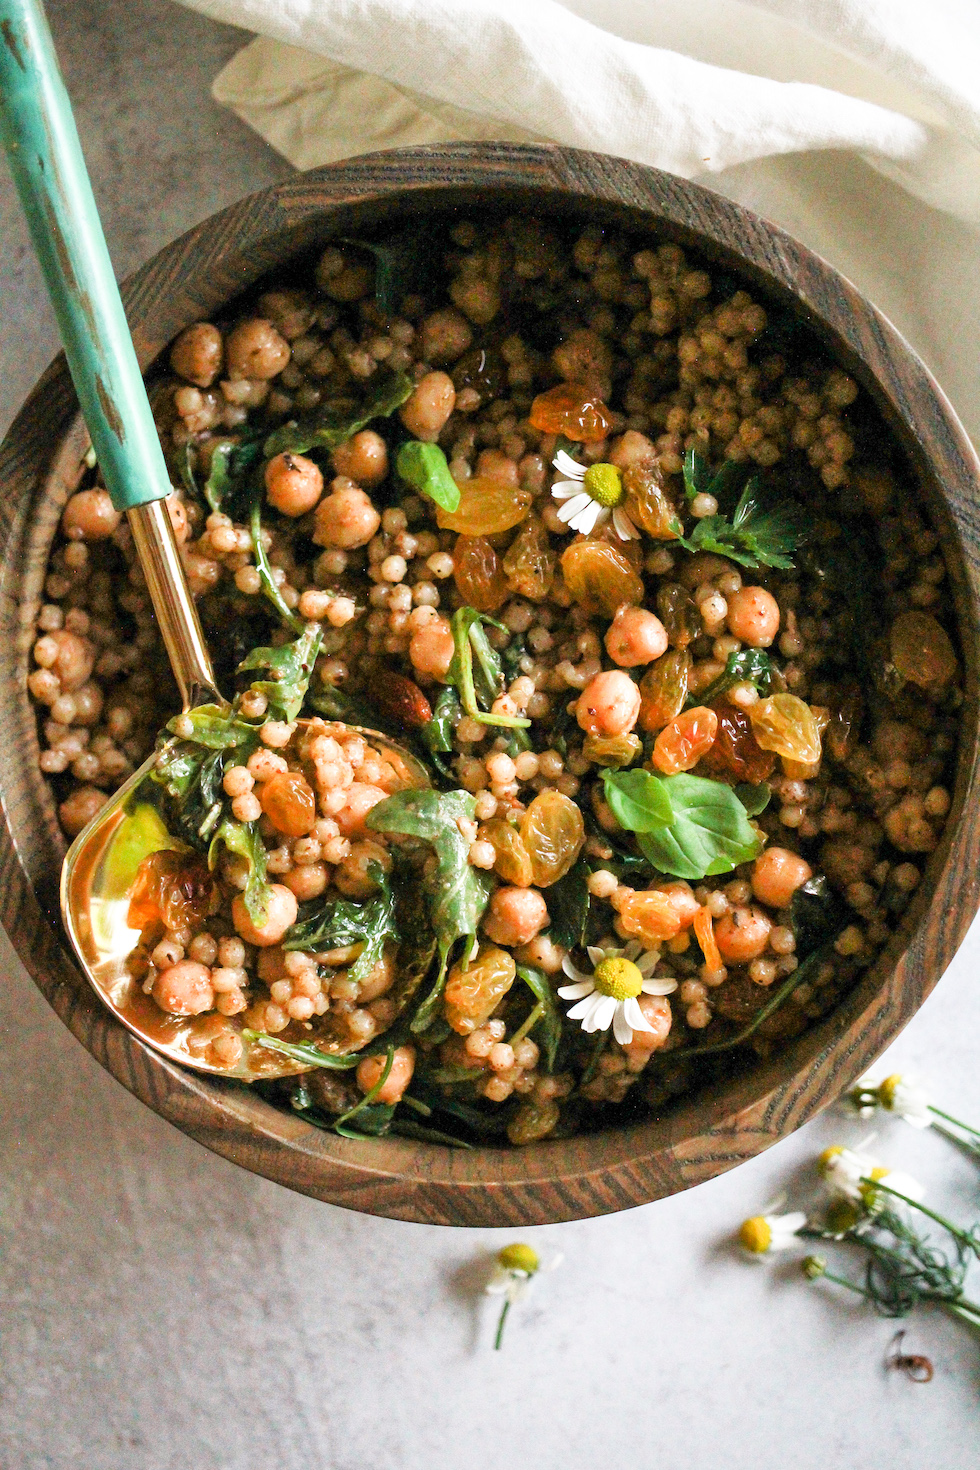 Pearl couscous salad in wooden bowl with turquoise and gold serving spoon